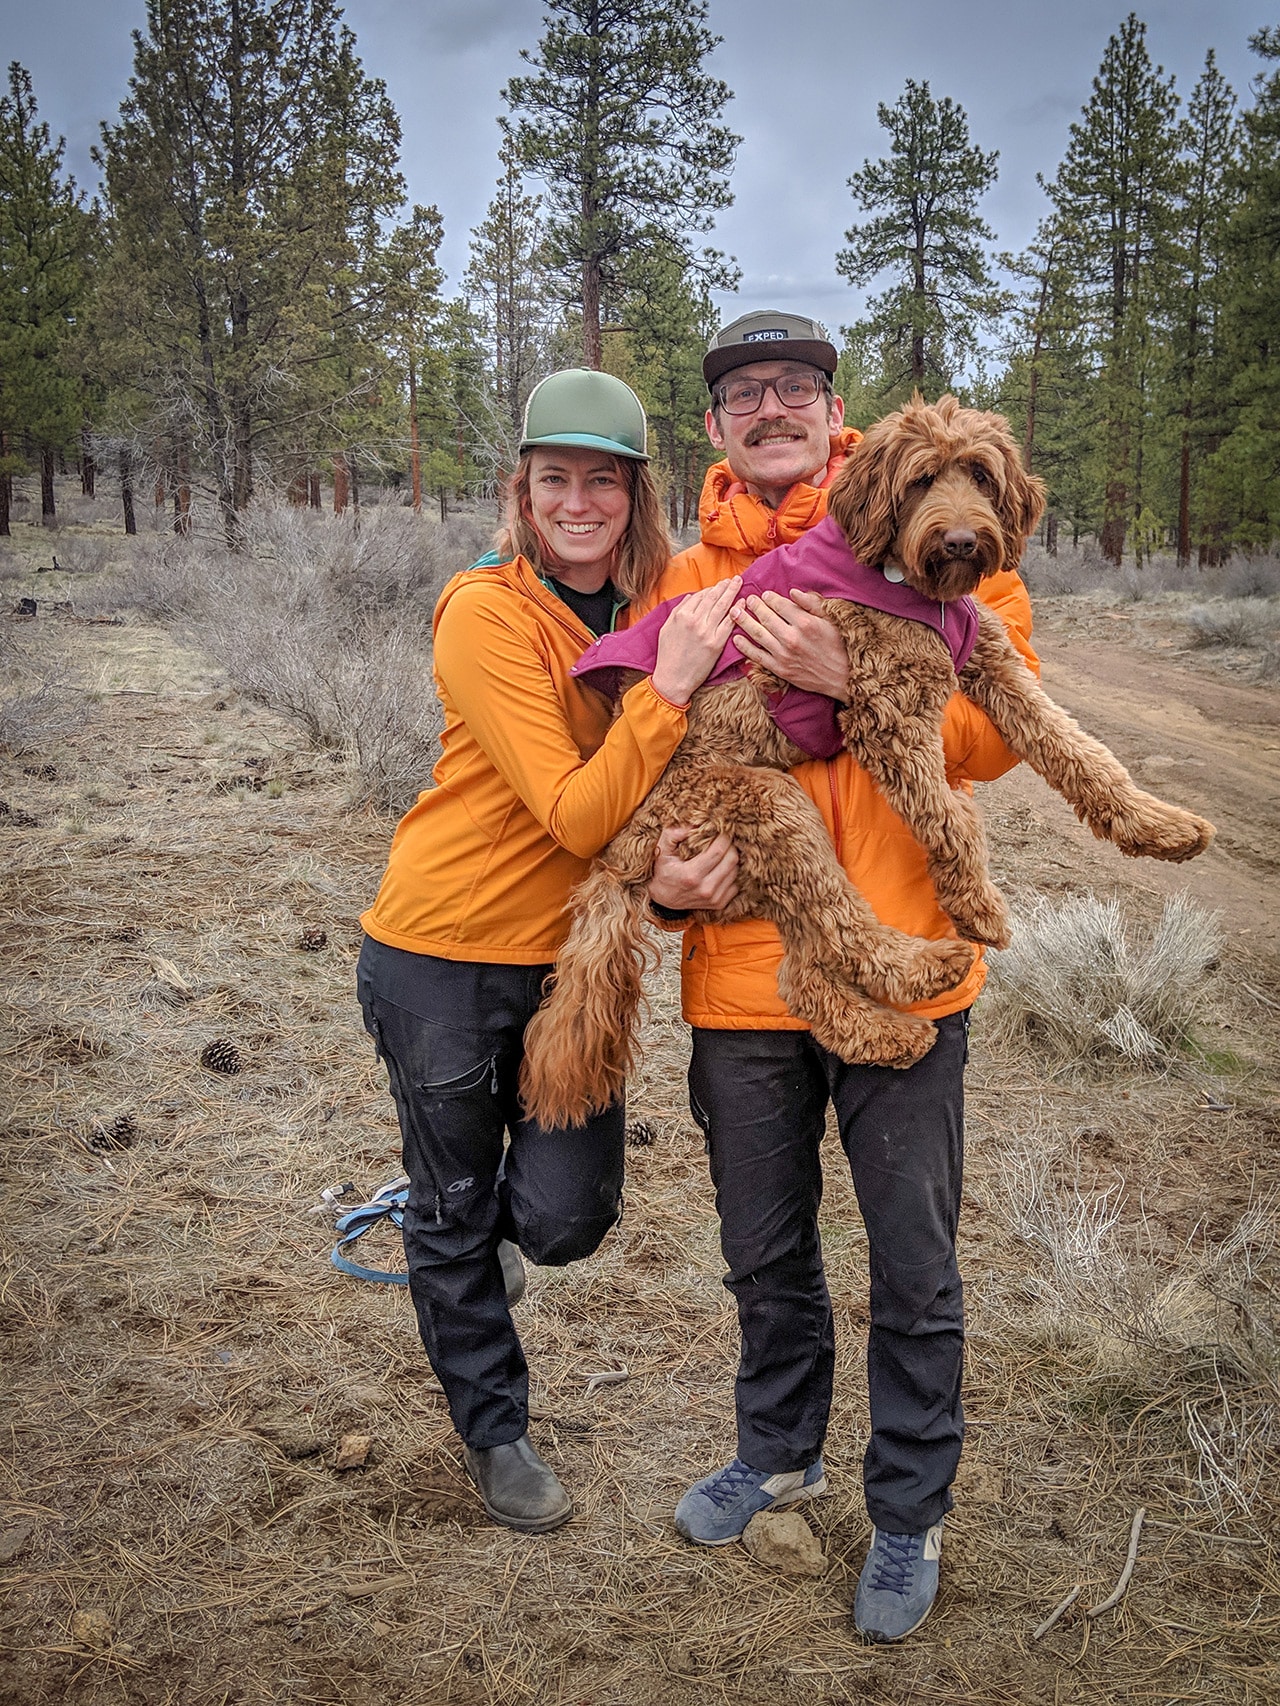 Graham, Shannon and their dog Pebble in Bend OR